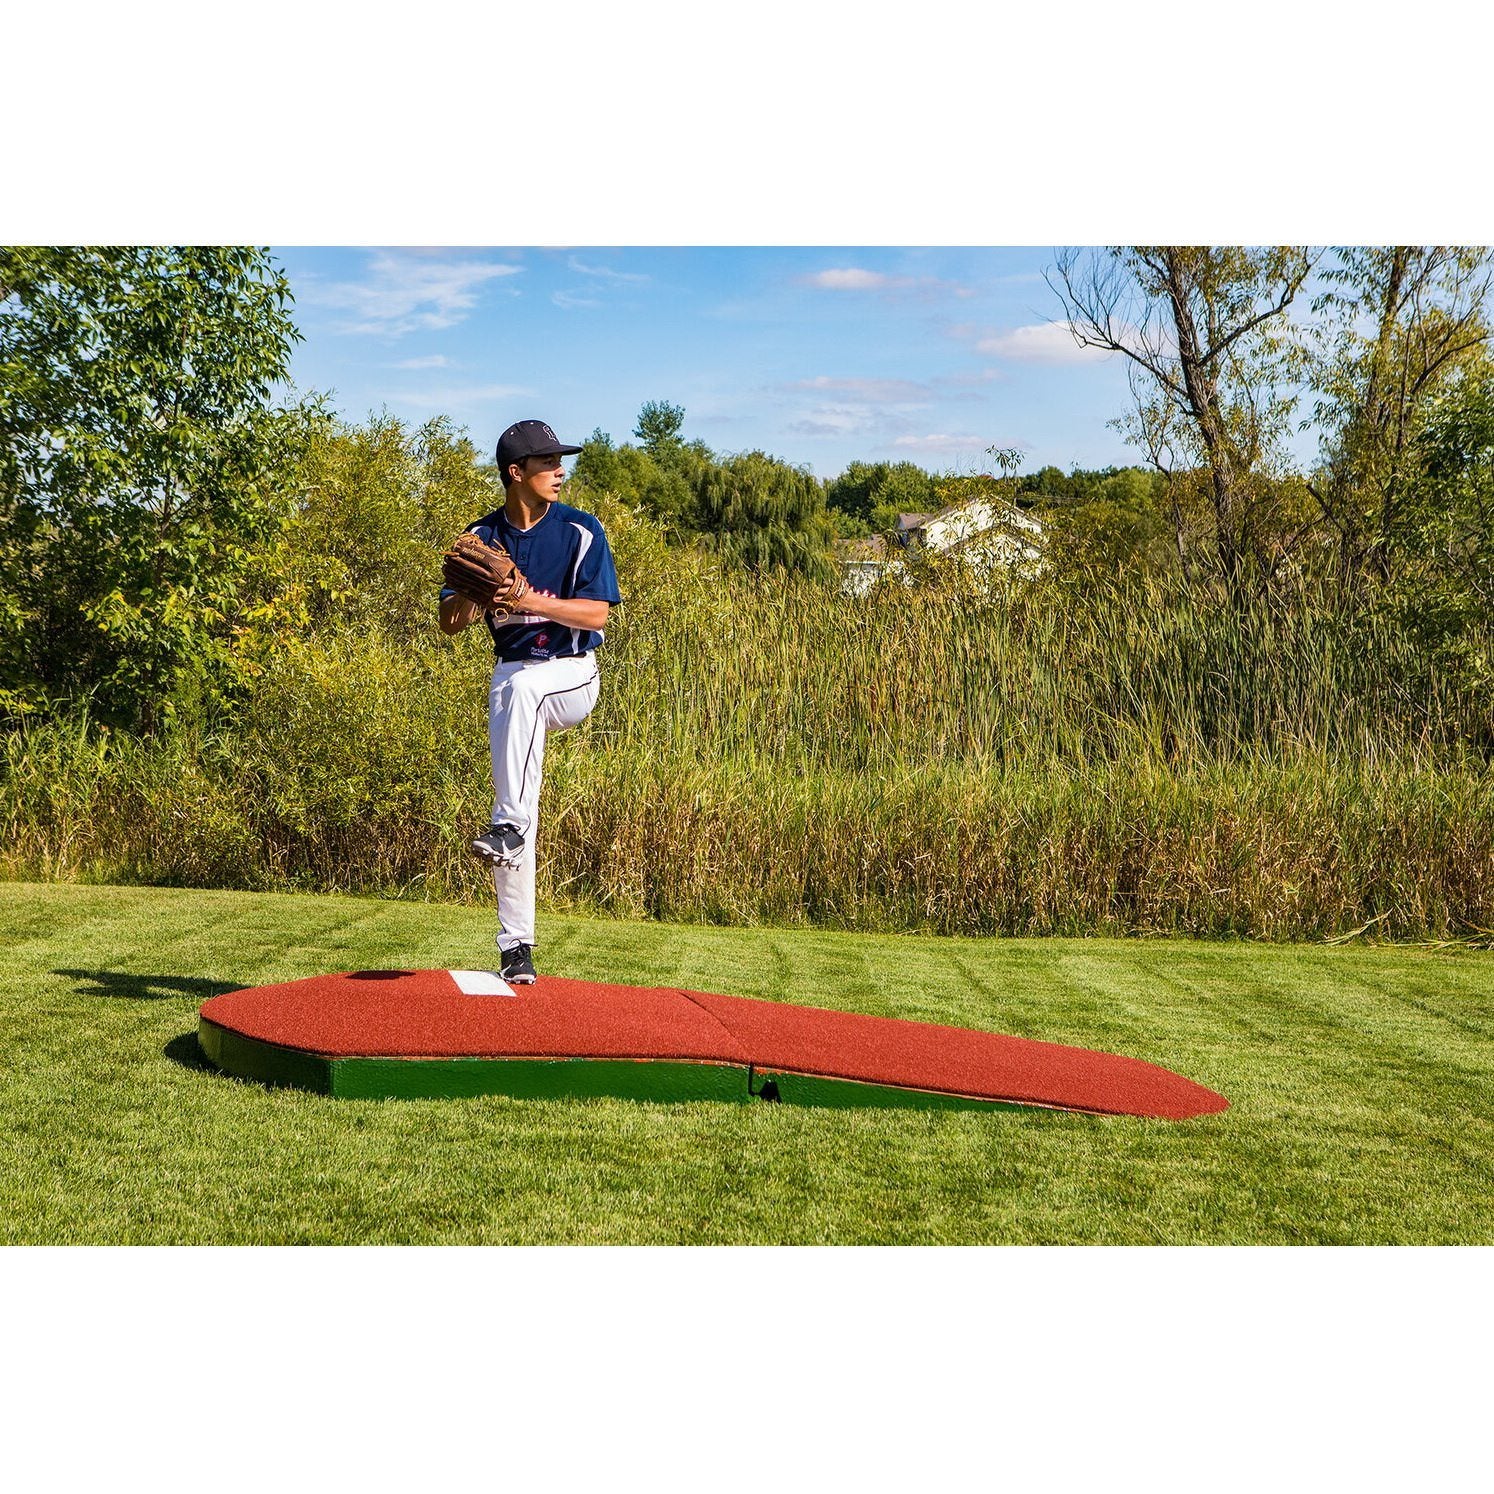 Portolite 10" Two-Piece Portable Pitching Mound red pitcher standing on mound